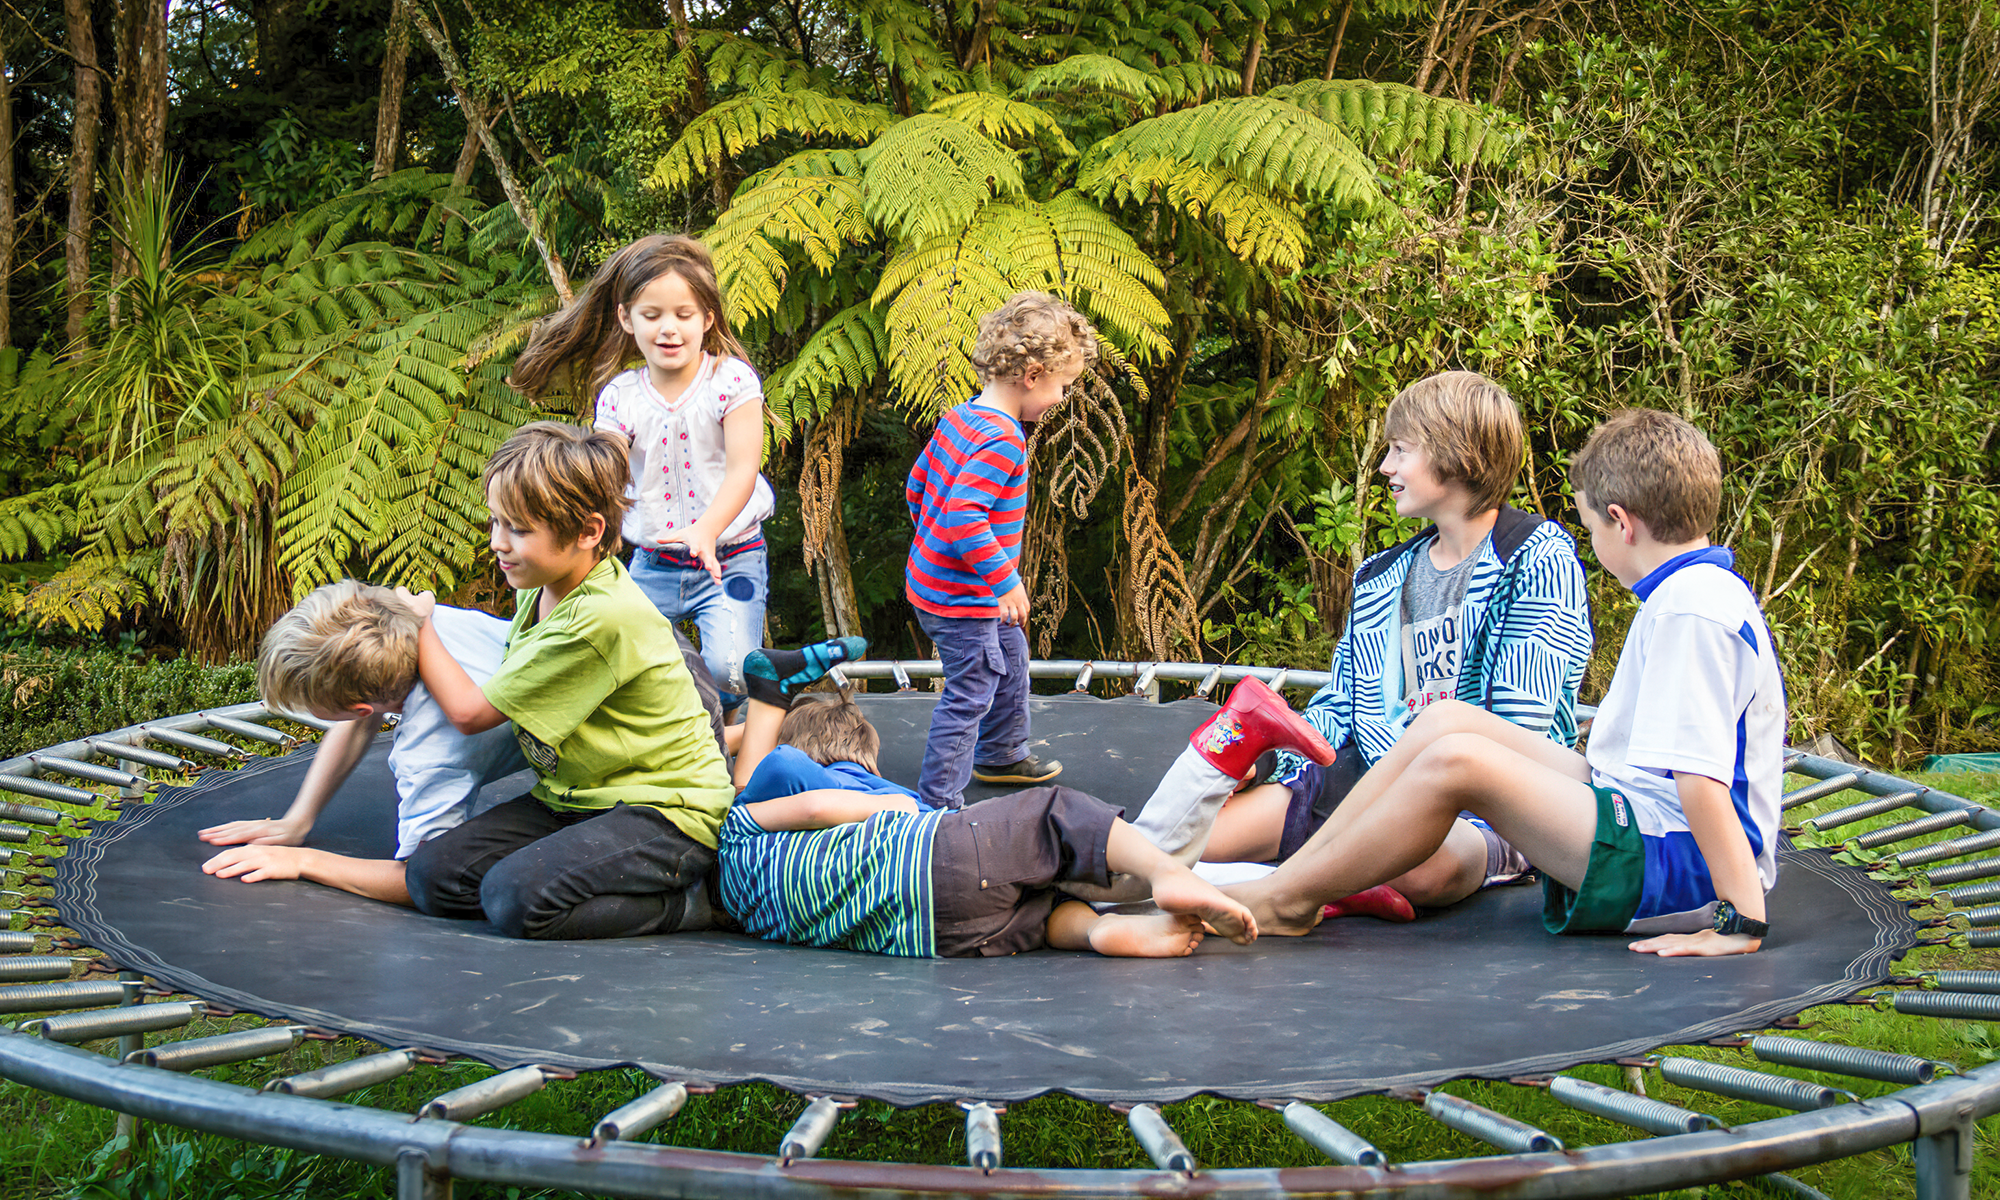 A group of children playing on a trampoline with a forest background